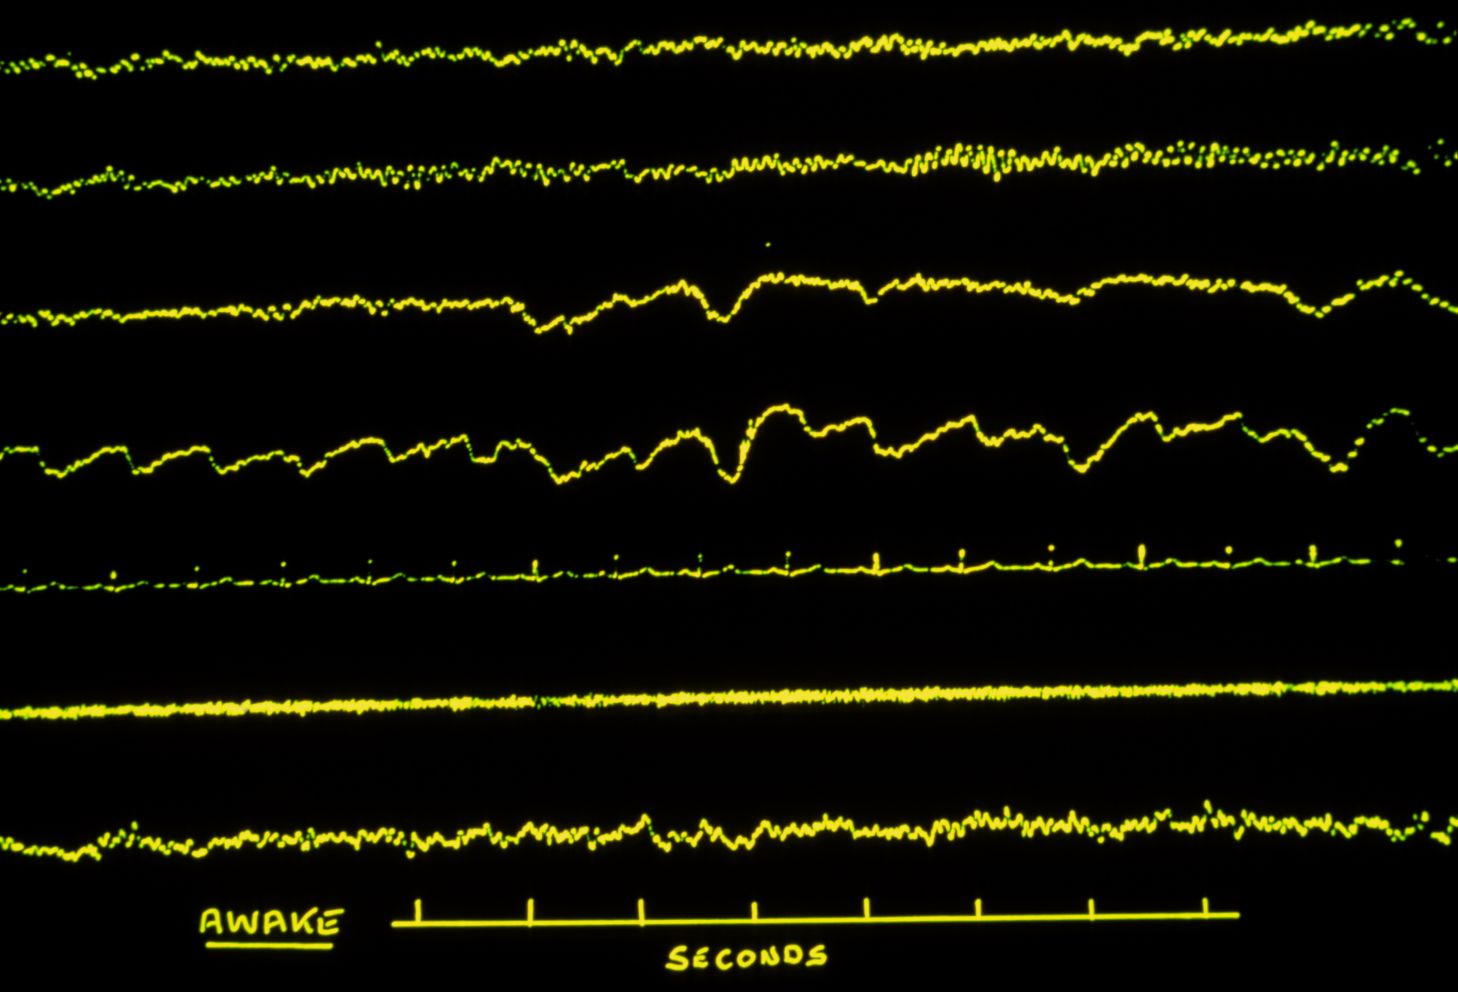 Sleep research: various traces of subject awake M872/0116 Rights Managed Credit: JAMES HOLMES/SCIENCE PHOTO LIBRARY Caption: Sleep research: series of false-colour traces showing typical brain & muscle activity in a subject who is awake. Numbered from top to bottom, 1 & 2 are electroencephalograms (EEG) of brain activity; 3 is an electrooculogram (EOG) of movement in the right eye; 4 an EOG of the left eye; 5 is an electrocardiogram (ECG) trace of heart activity. Finally, 6 & 7 are electromyograms (EMG) showing activity in the laryngeal (6) and neck (7) muscles. Sleep comprises cycles of 5 distinct stages; 1-4 are stages of increasingly deeper sleep known as non-rapid eye movement (NREM), and a 5th stage of lighter, rapid eye movement (REM) sleep.